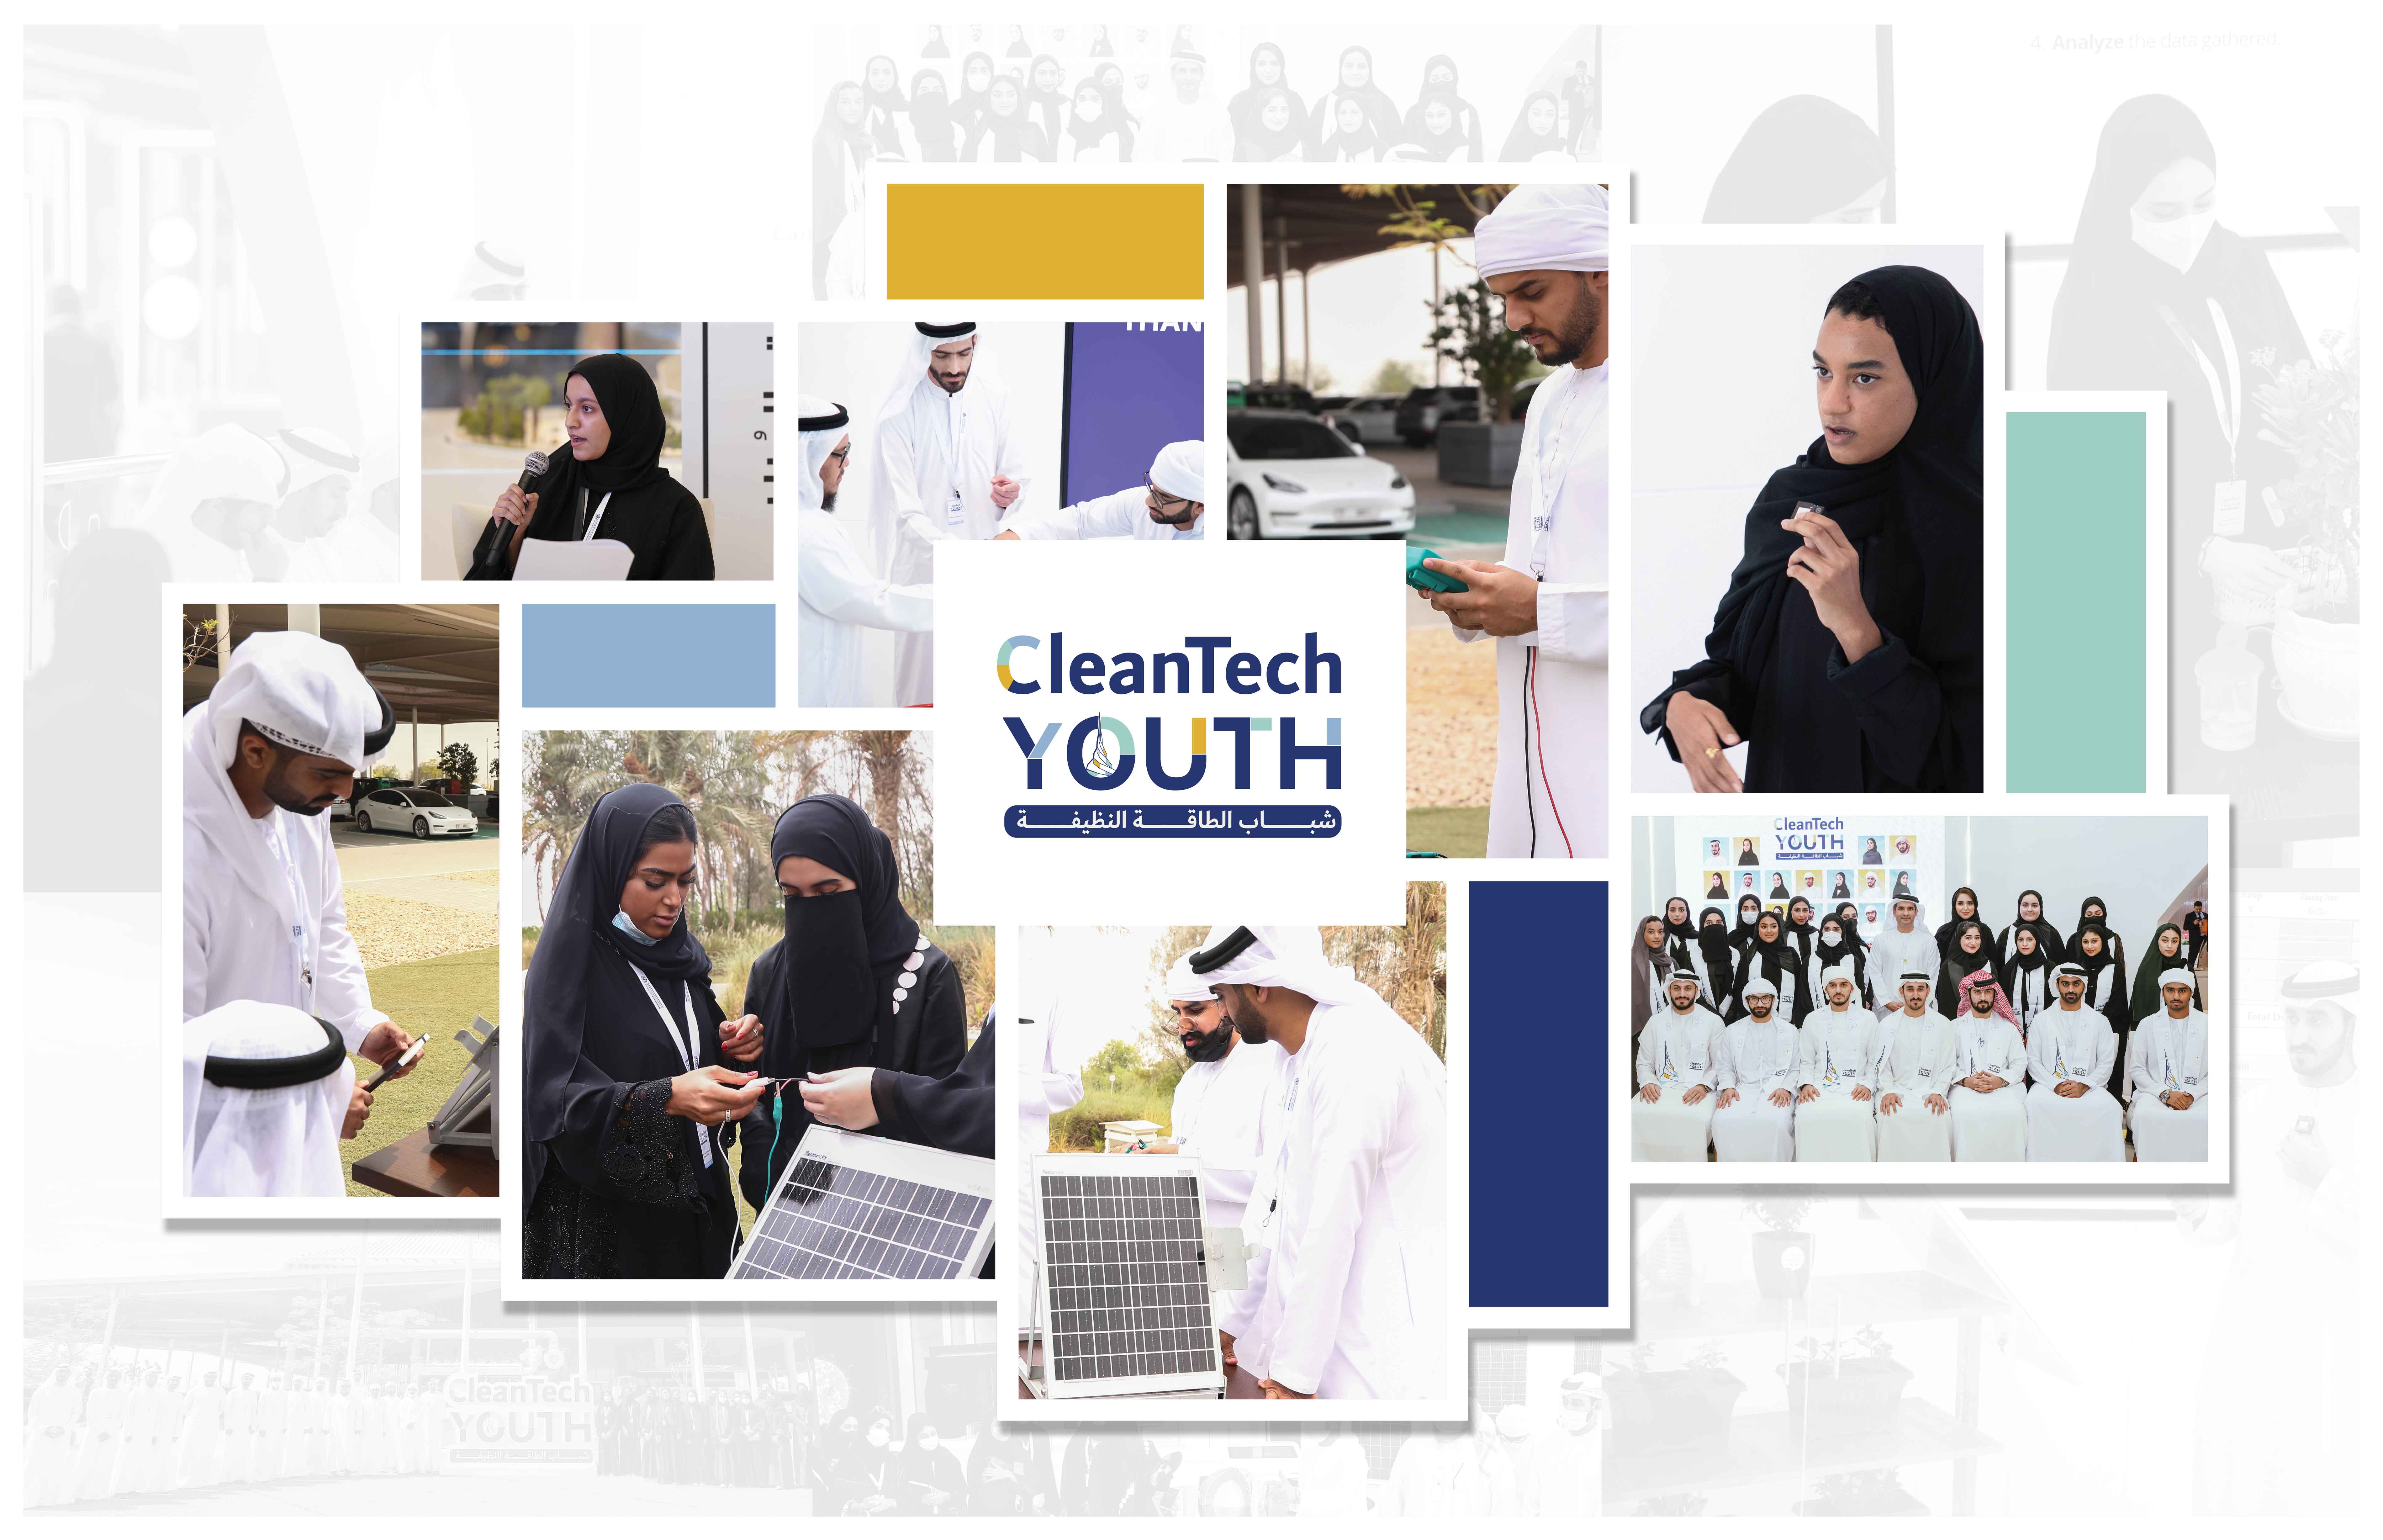 DEWA’s Cleantech Youth Programme currently accepting applications from students and graduates of local universities